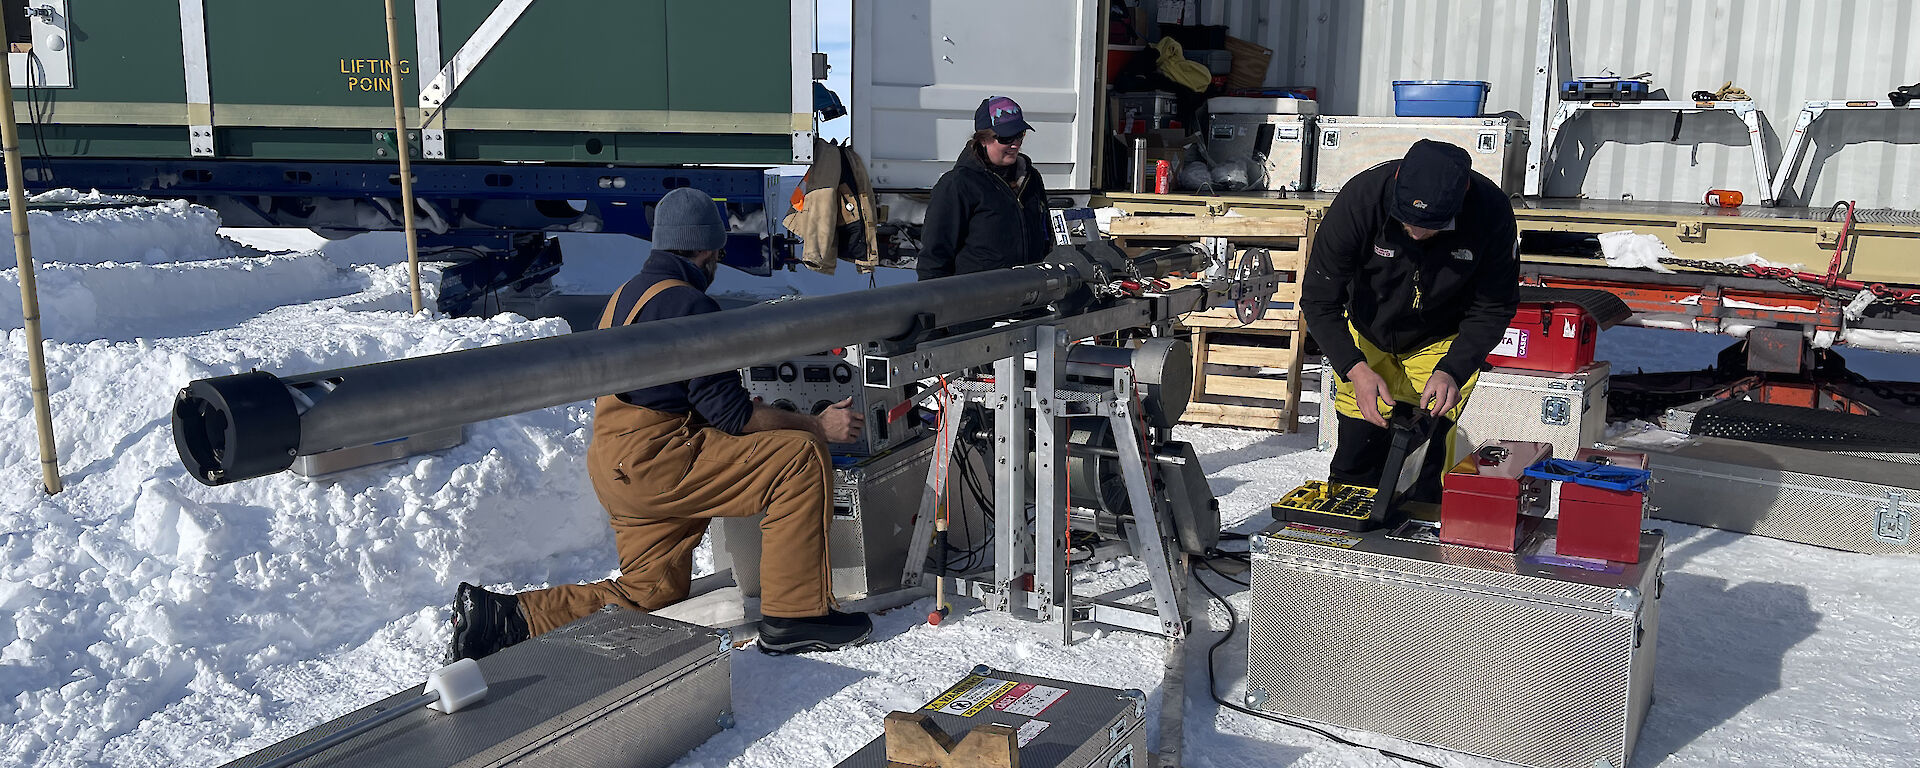 Three people out on the snow in front of a large, open transport container containing assorted trunks, toolboxes and other gear. They are examining some drilling apparatus, a slim cylindrical device a few metres long, mounted on a metal stand in a horizontal position